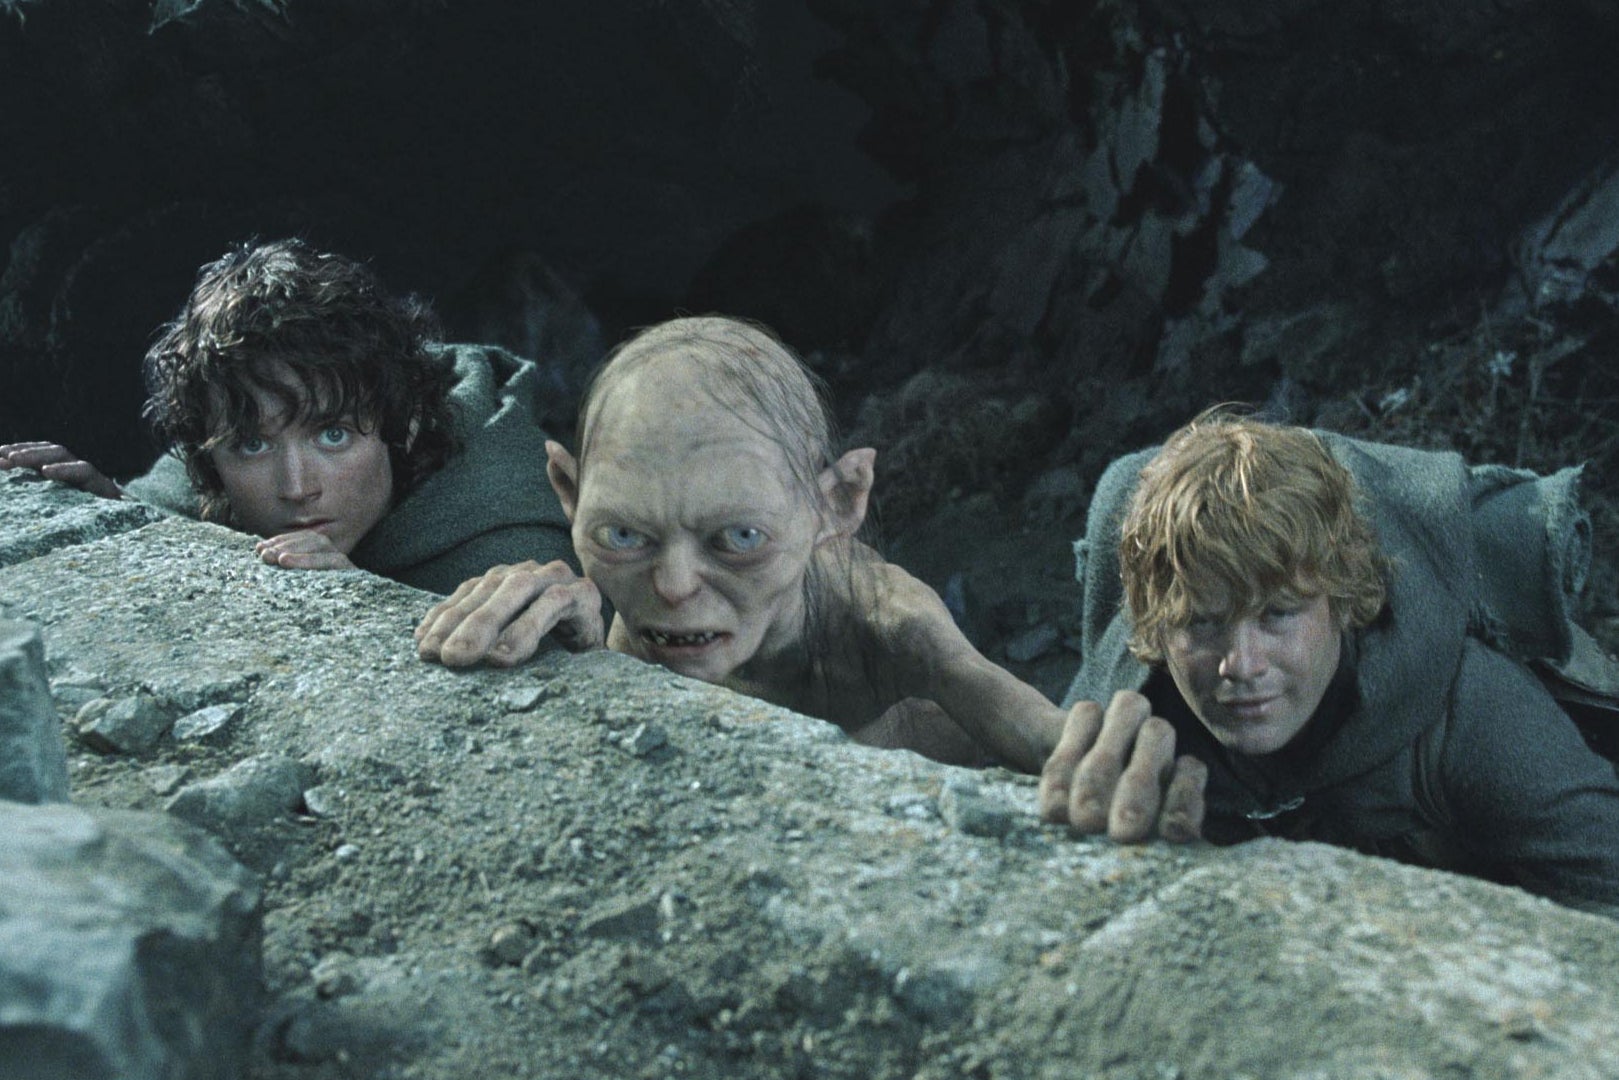 Serkis’s Gollum (centre) alongside Elijah Wood and Sean Astin in ‘The Lord of the Rings: The Return of the King’